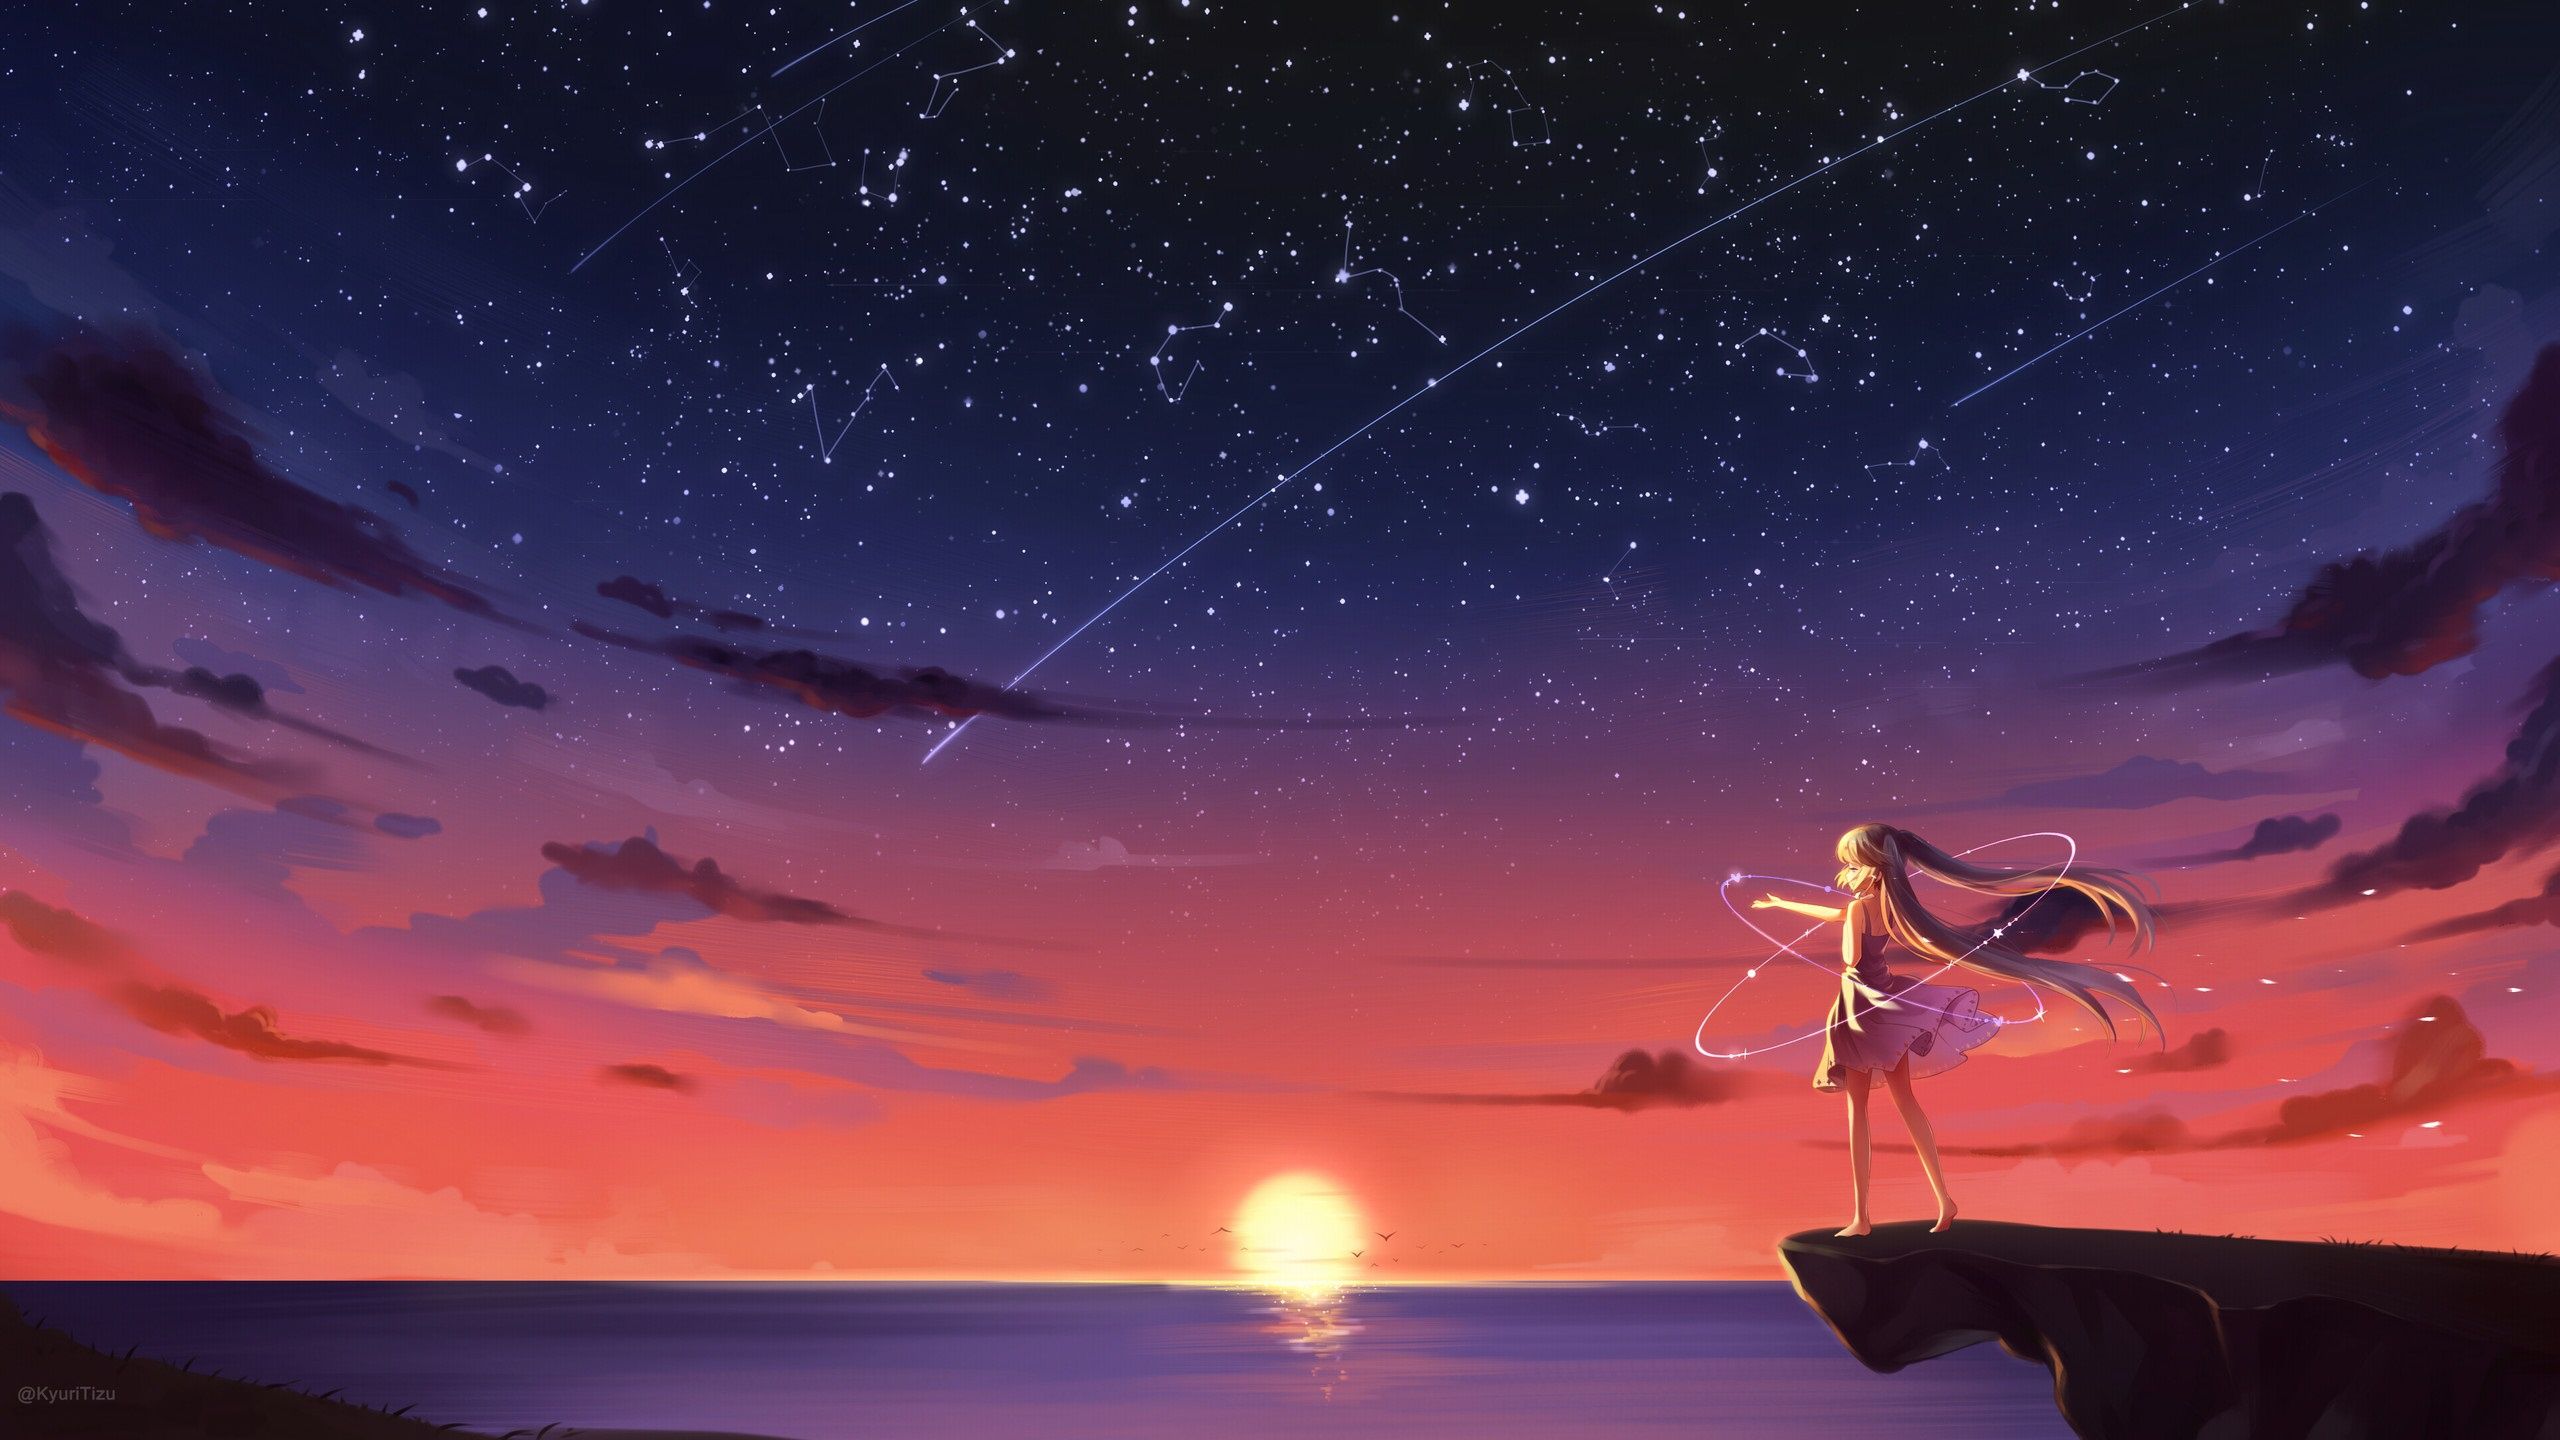 Anime girl looking at the stars wallpaper background - 2560x1440